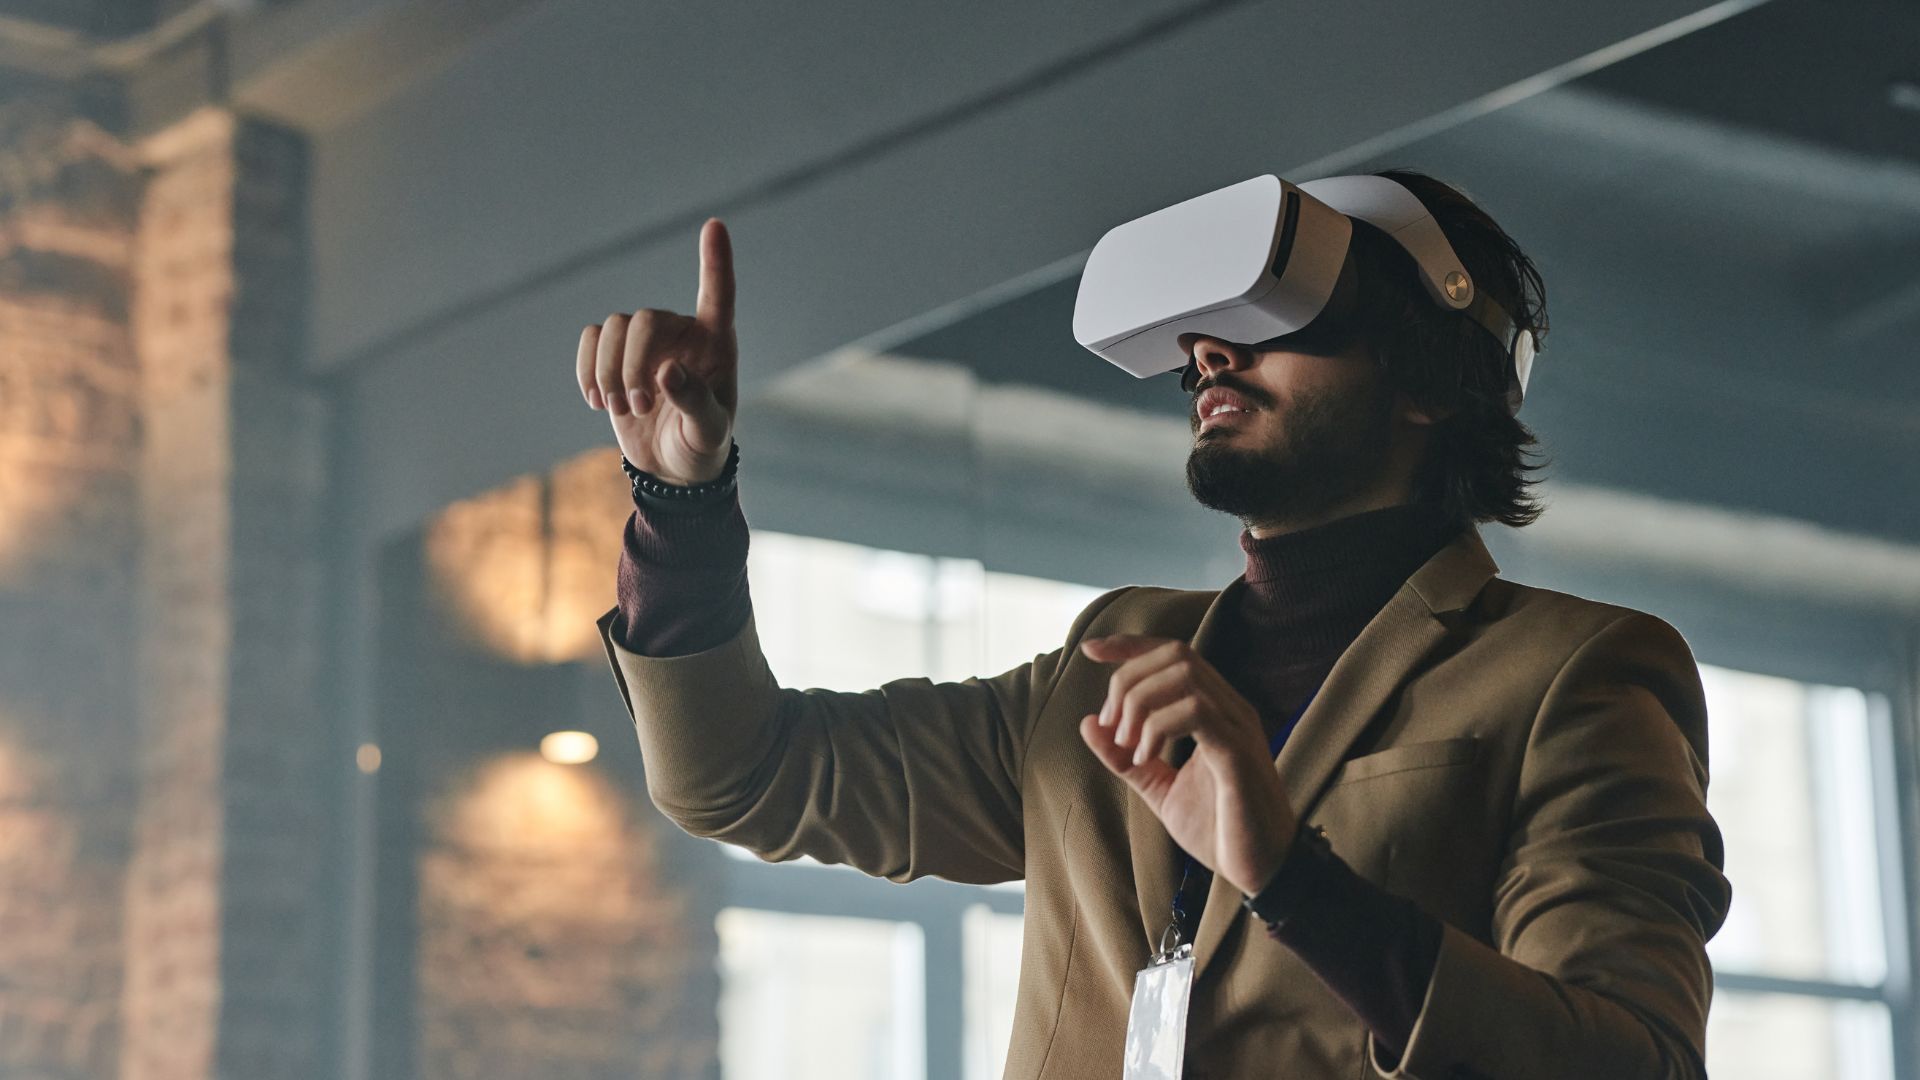 VR and AR experiences are a great addition to your corporate event swag ideas